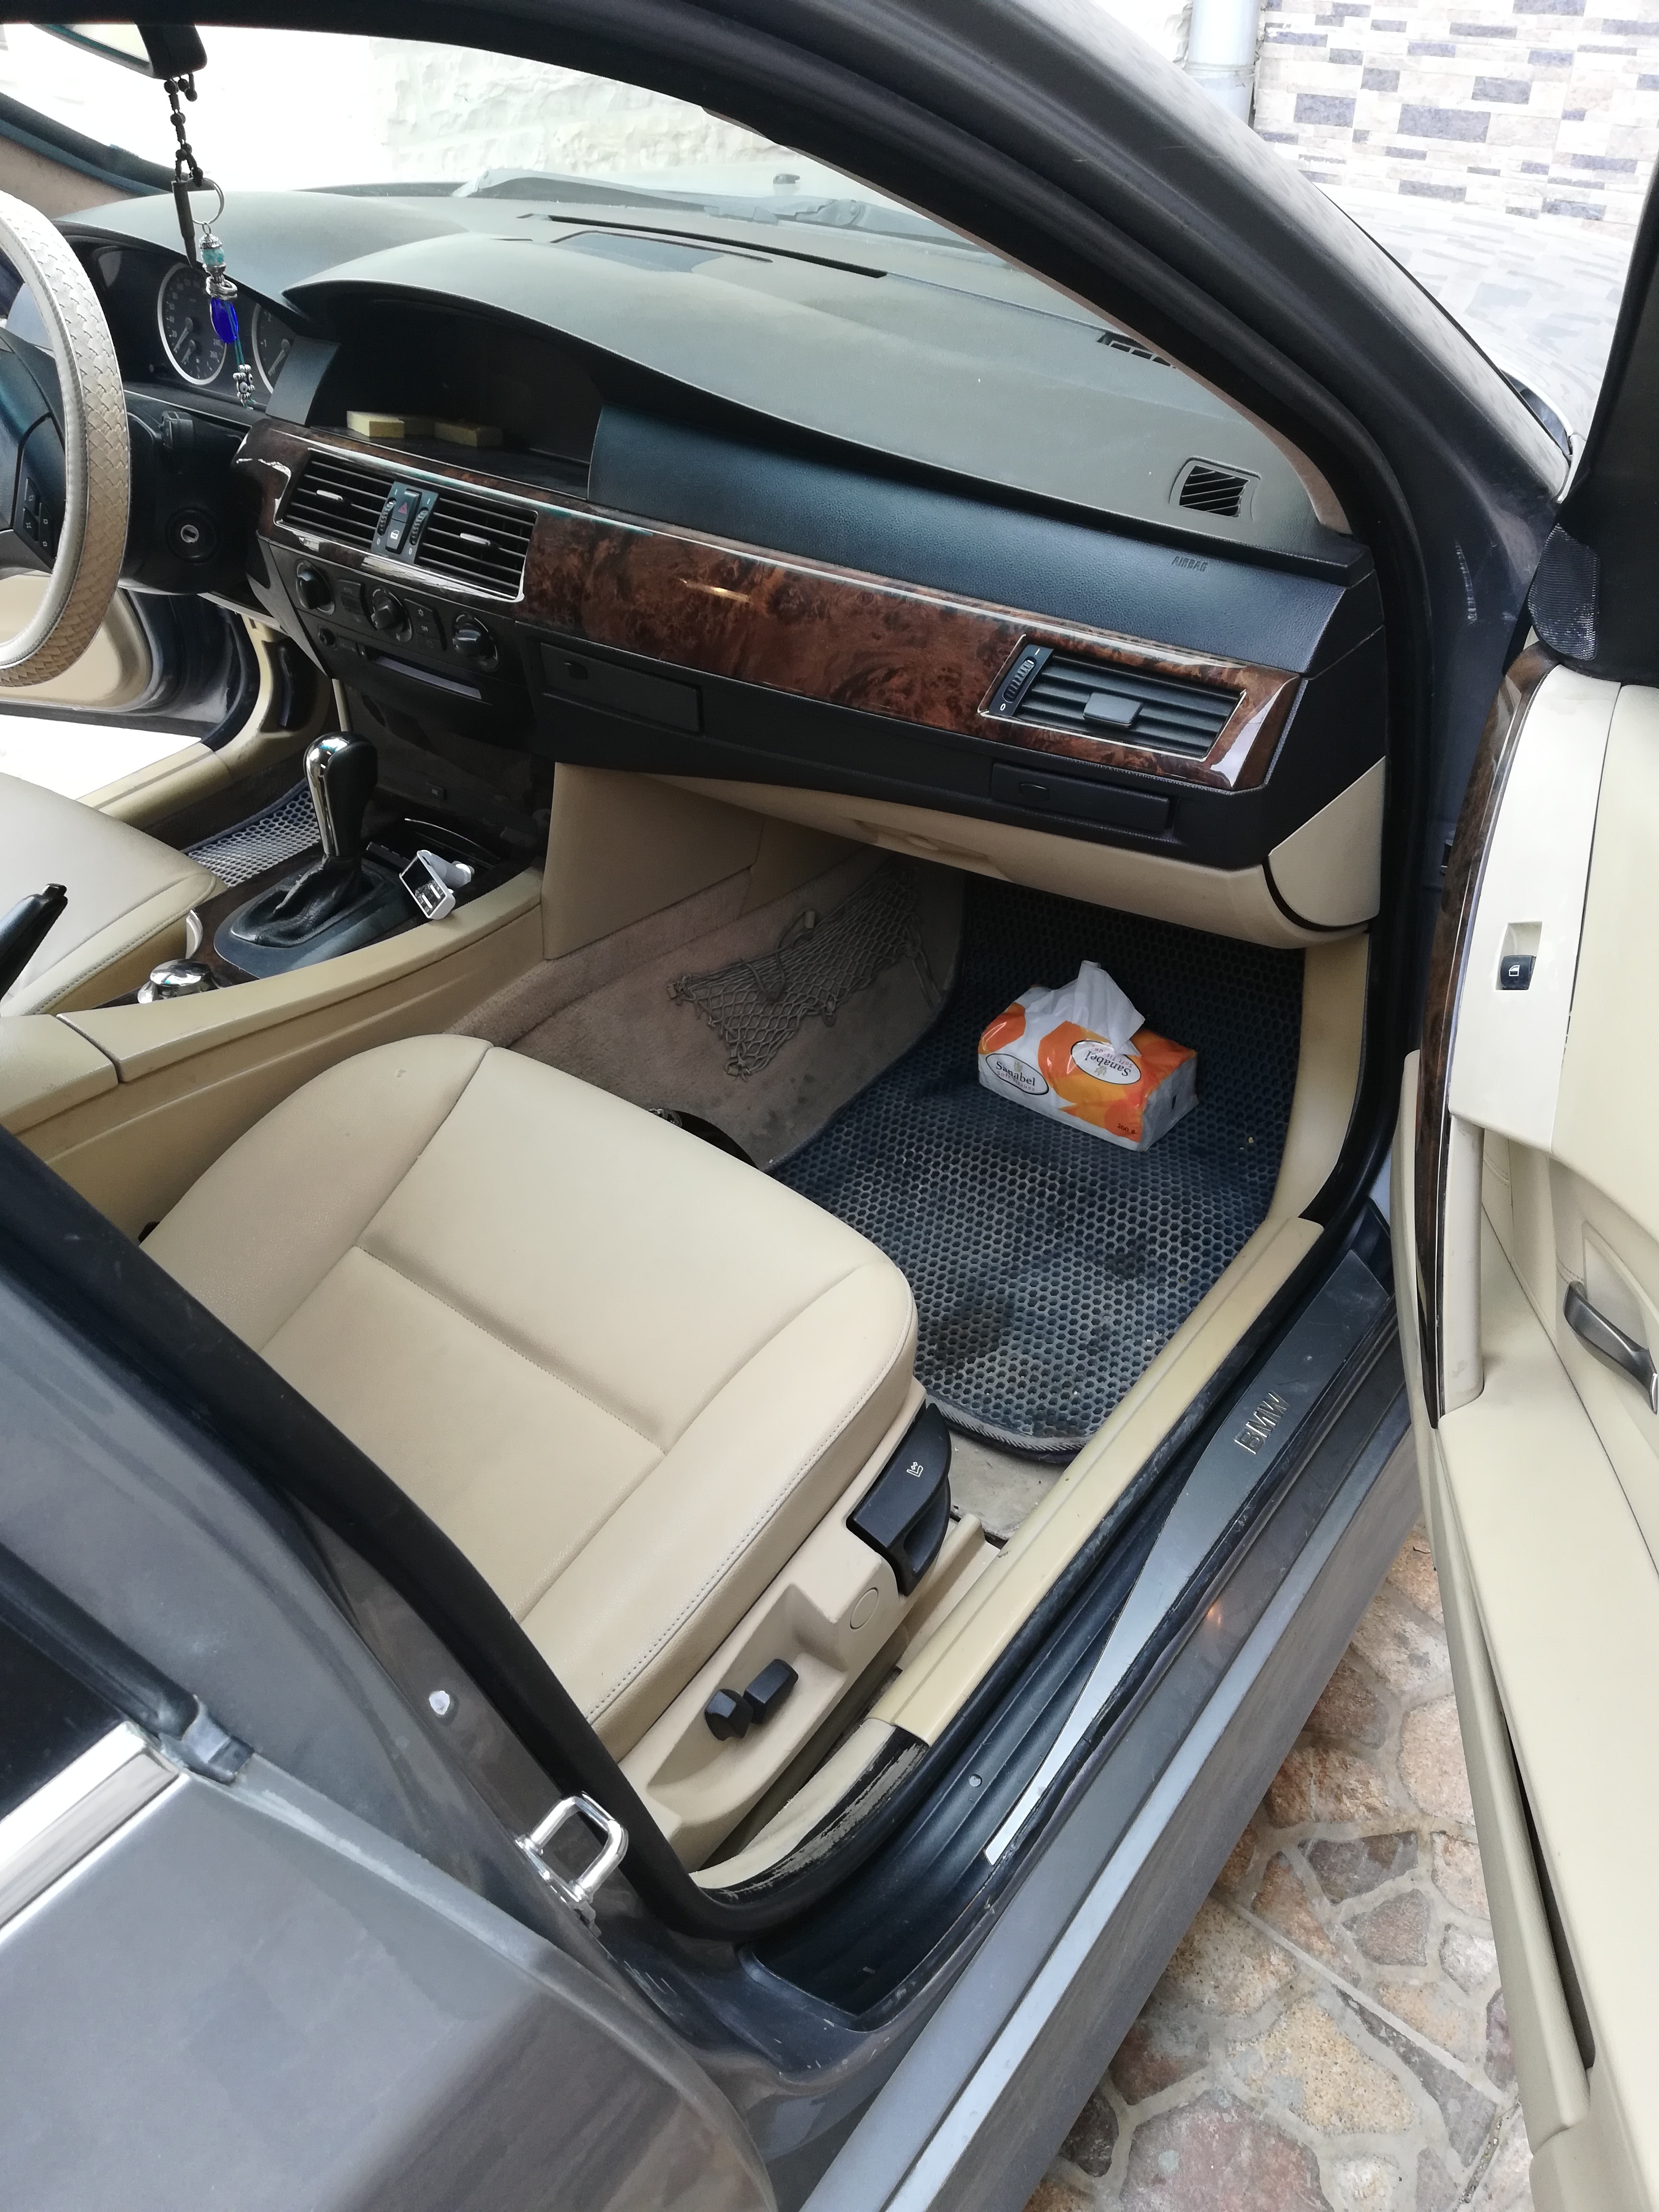 2016 Nissan patrol le platinum in good shape, clean and it is rarely used for some months, it runs on low kilometers, perfect tires, Gcc spec and it is in good -  BMW 520 2005 لا تنسَ أنك...